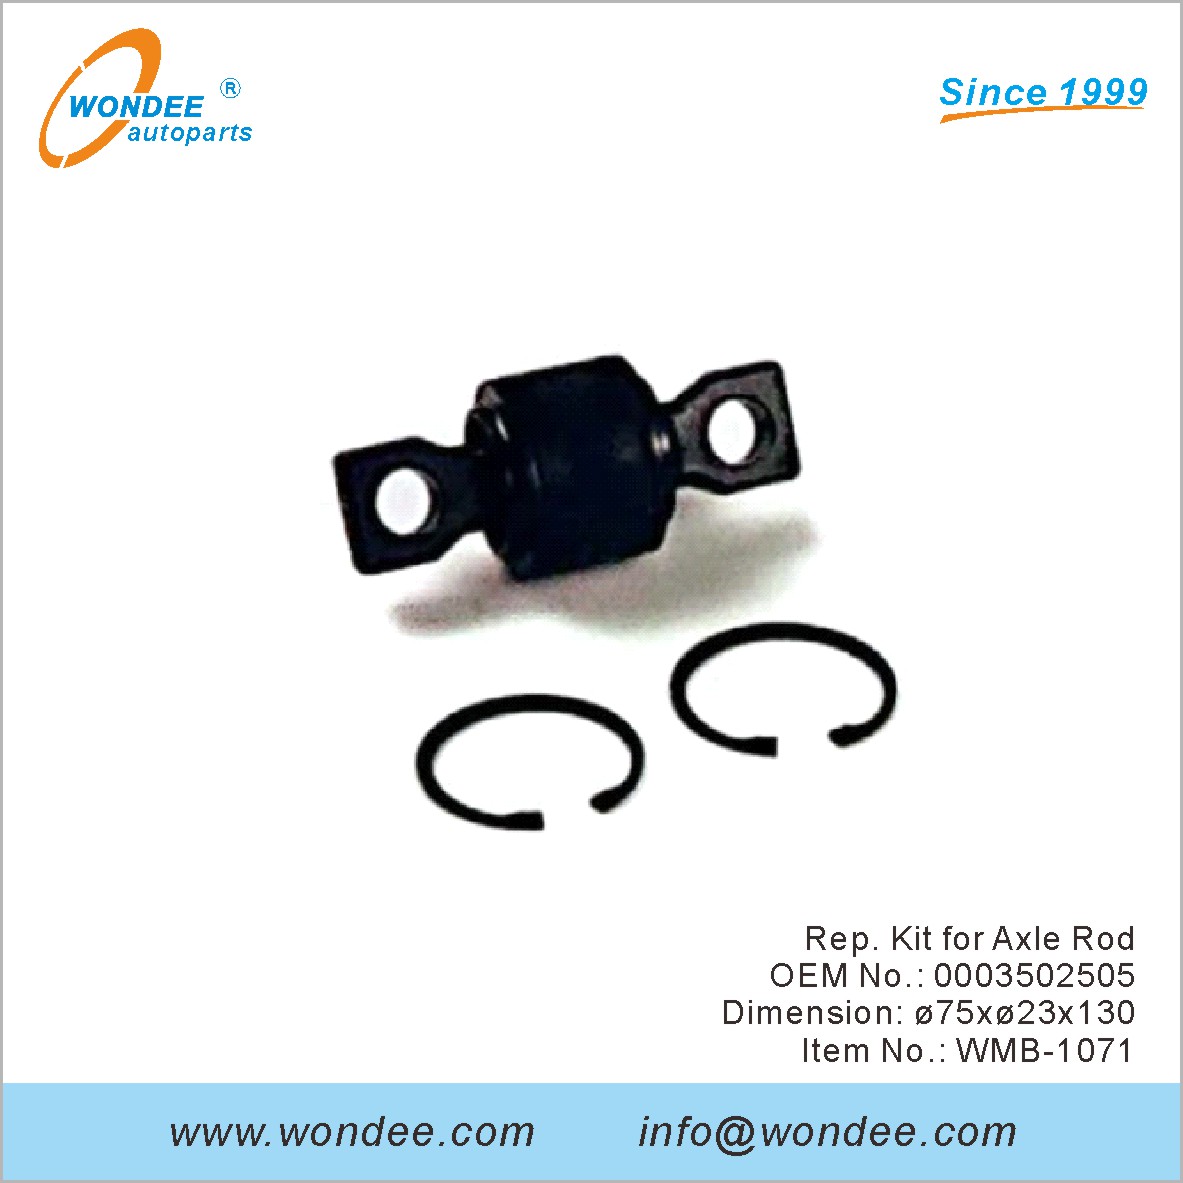 Rep. Kit for Axle Rod OEM 0003502505 for Benz from WONDEE